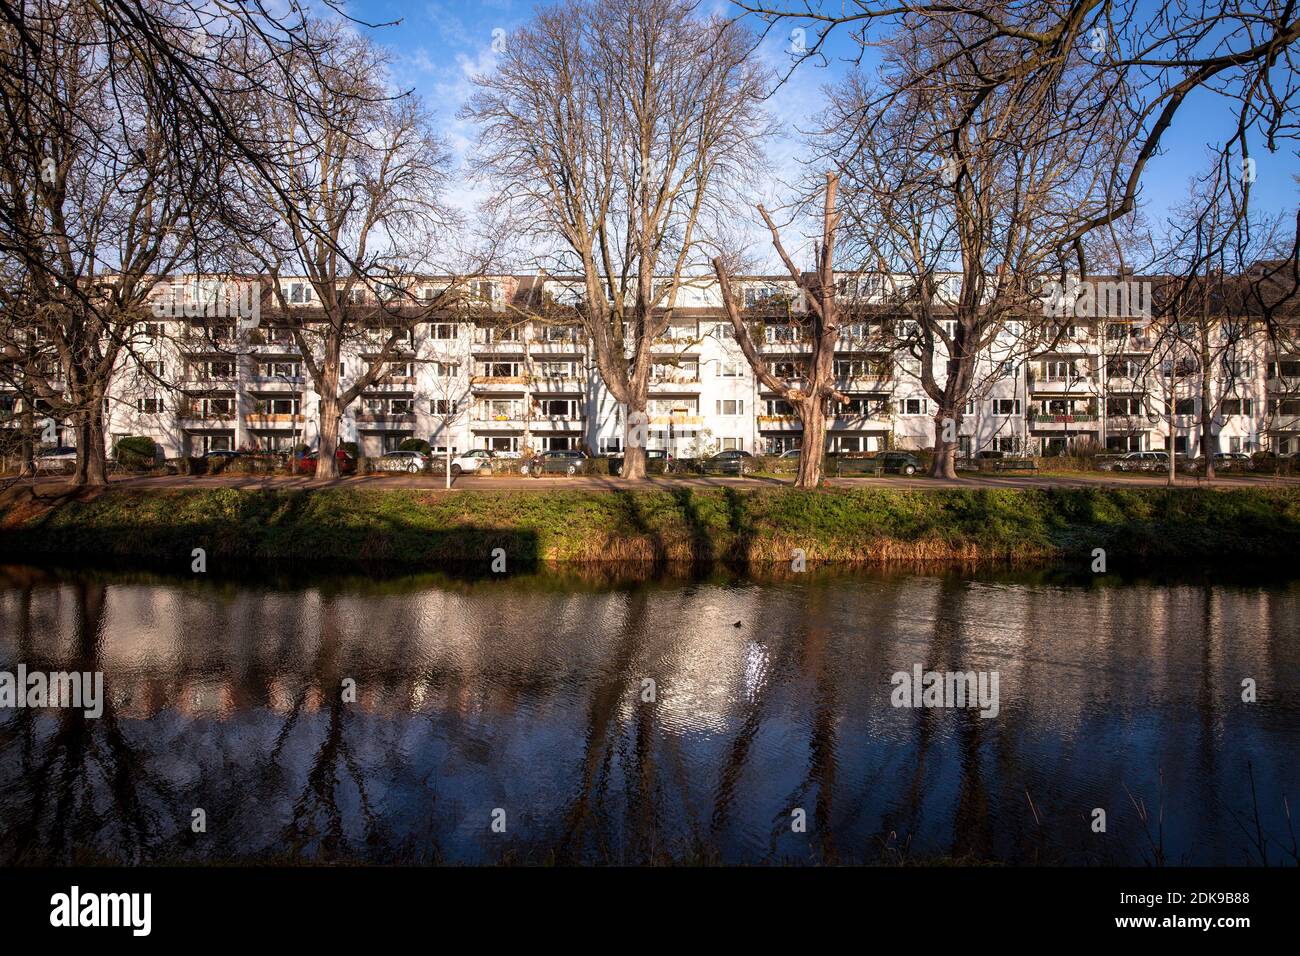 the Clarenbach canal in the district Lindenthal, it is part of the Lindenthal canal, which runs from the pond Aachener Weiher to the street Lindenthal Stock Photo